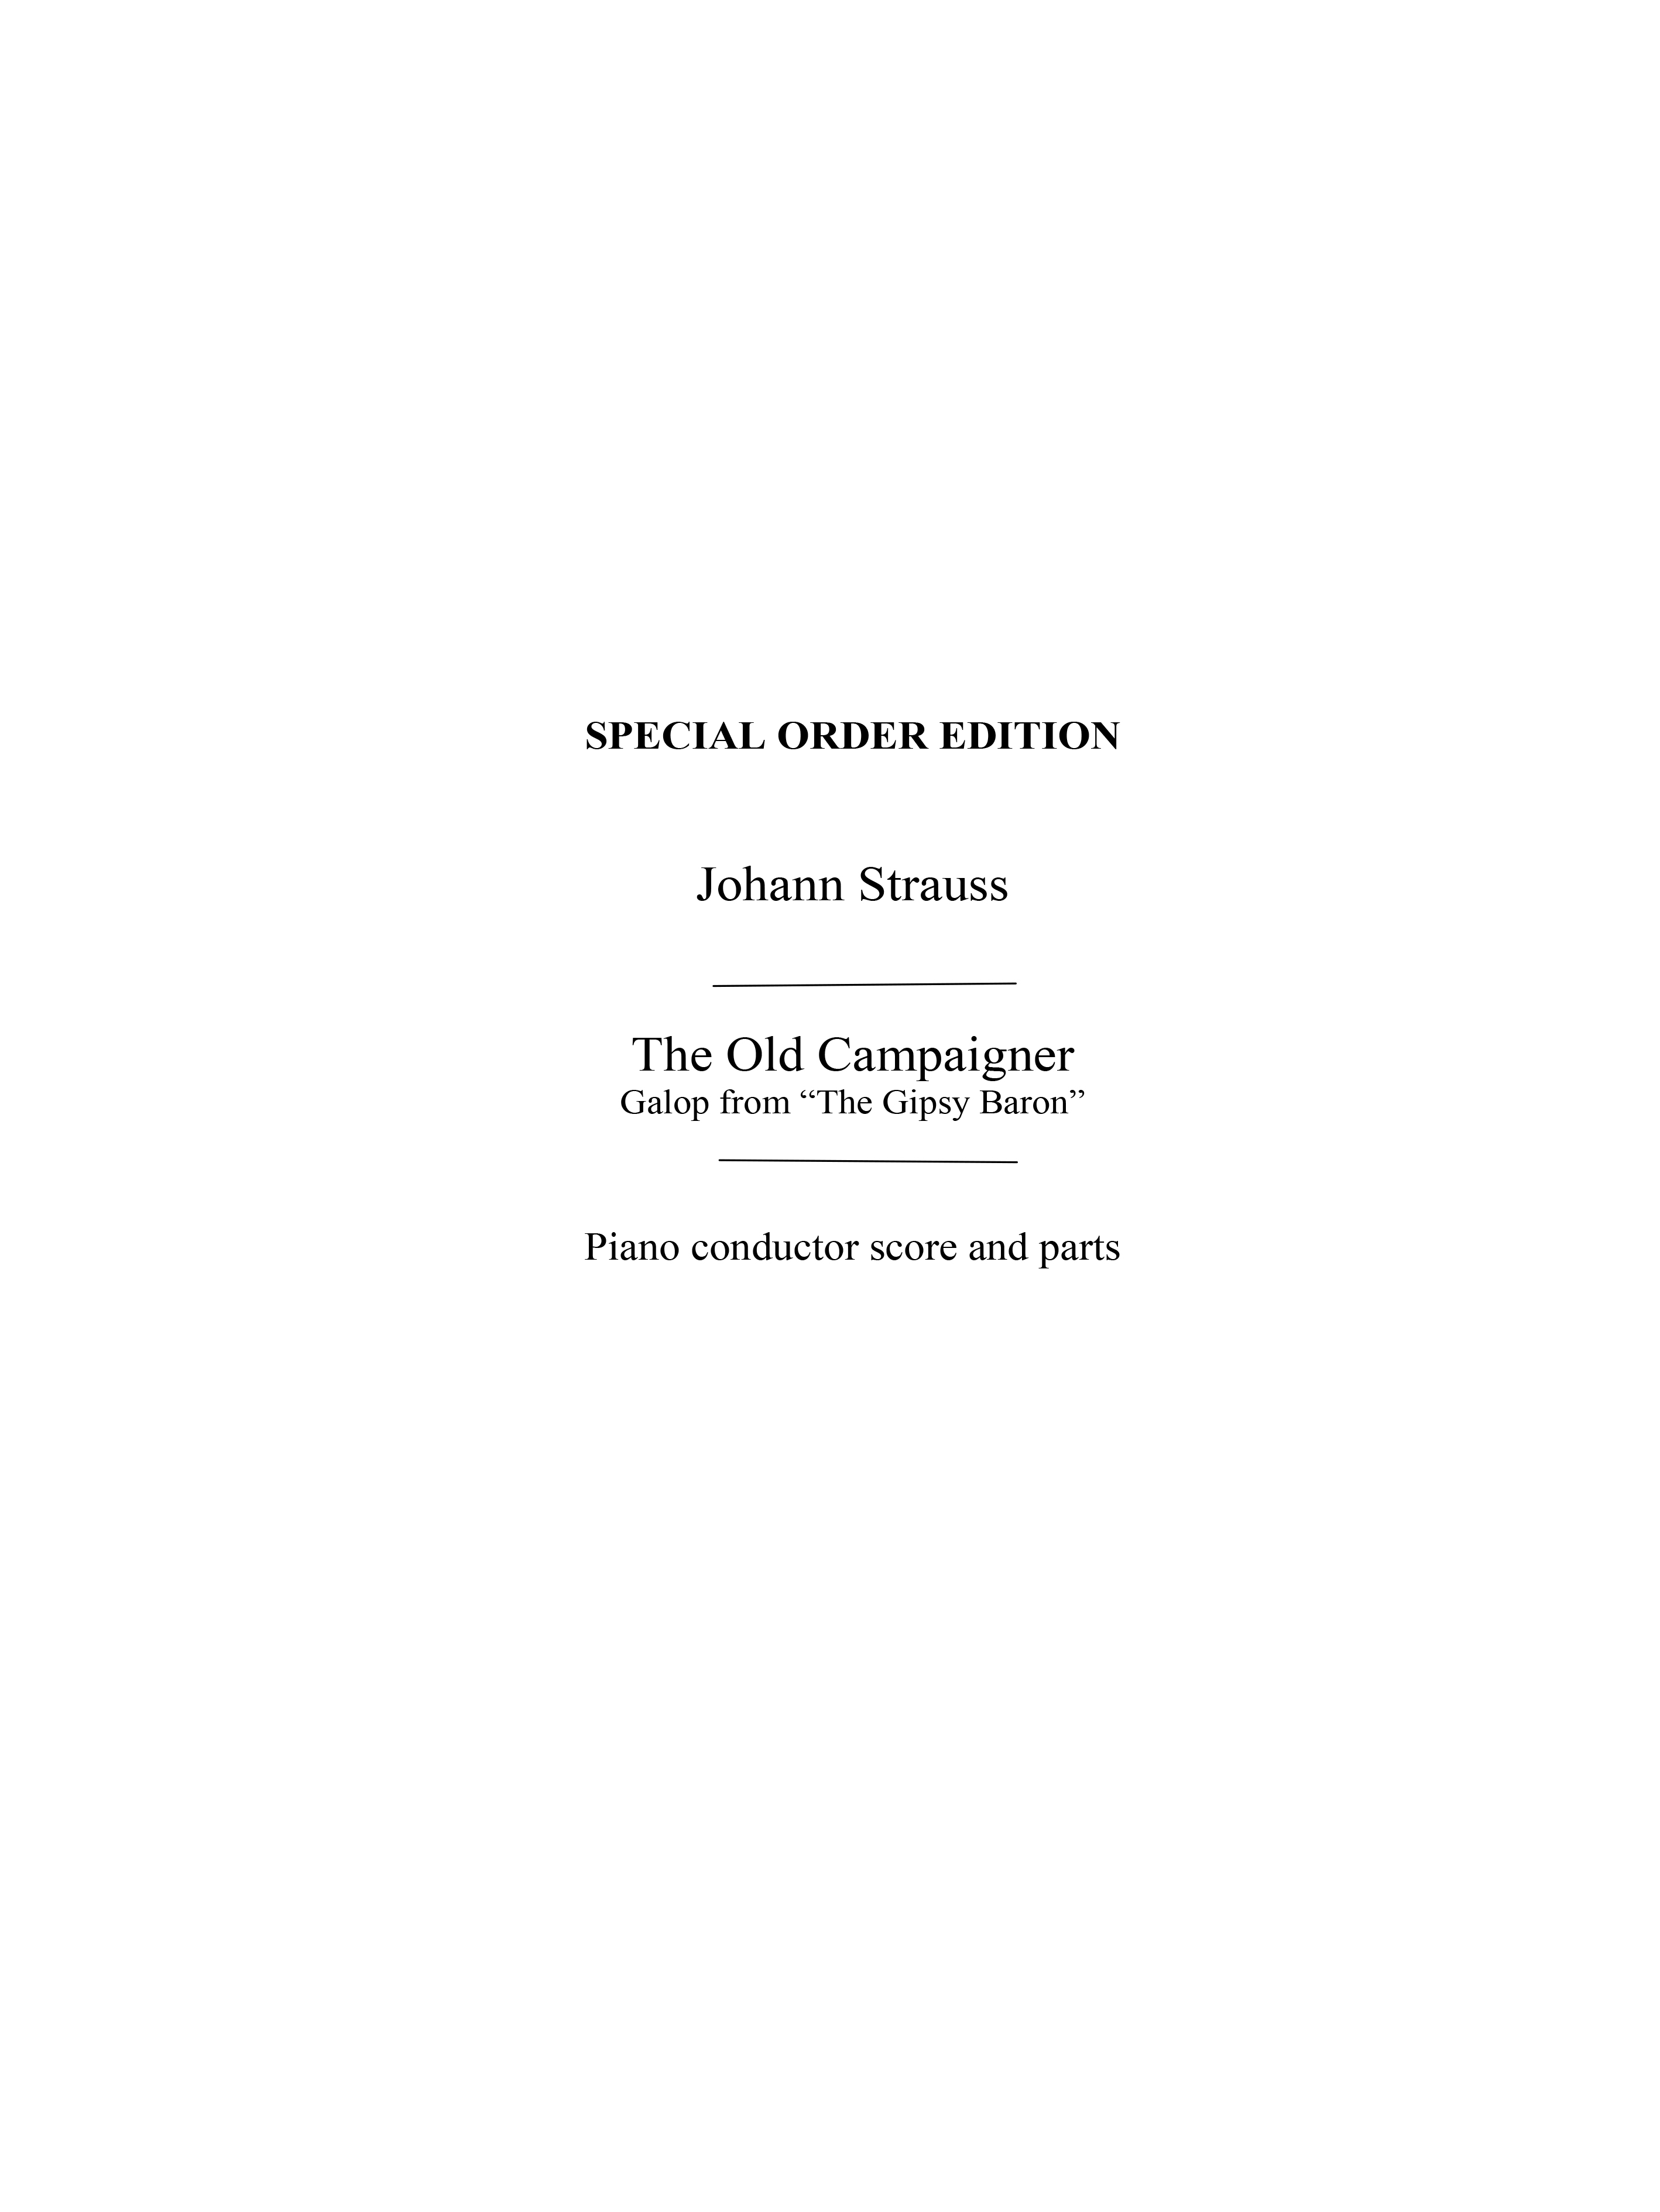 Strauss, J The Old Campaigner Galop (Geiger) Orch Pf Sc/Pts